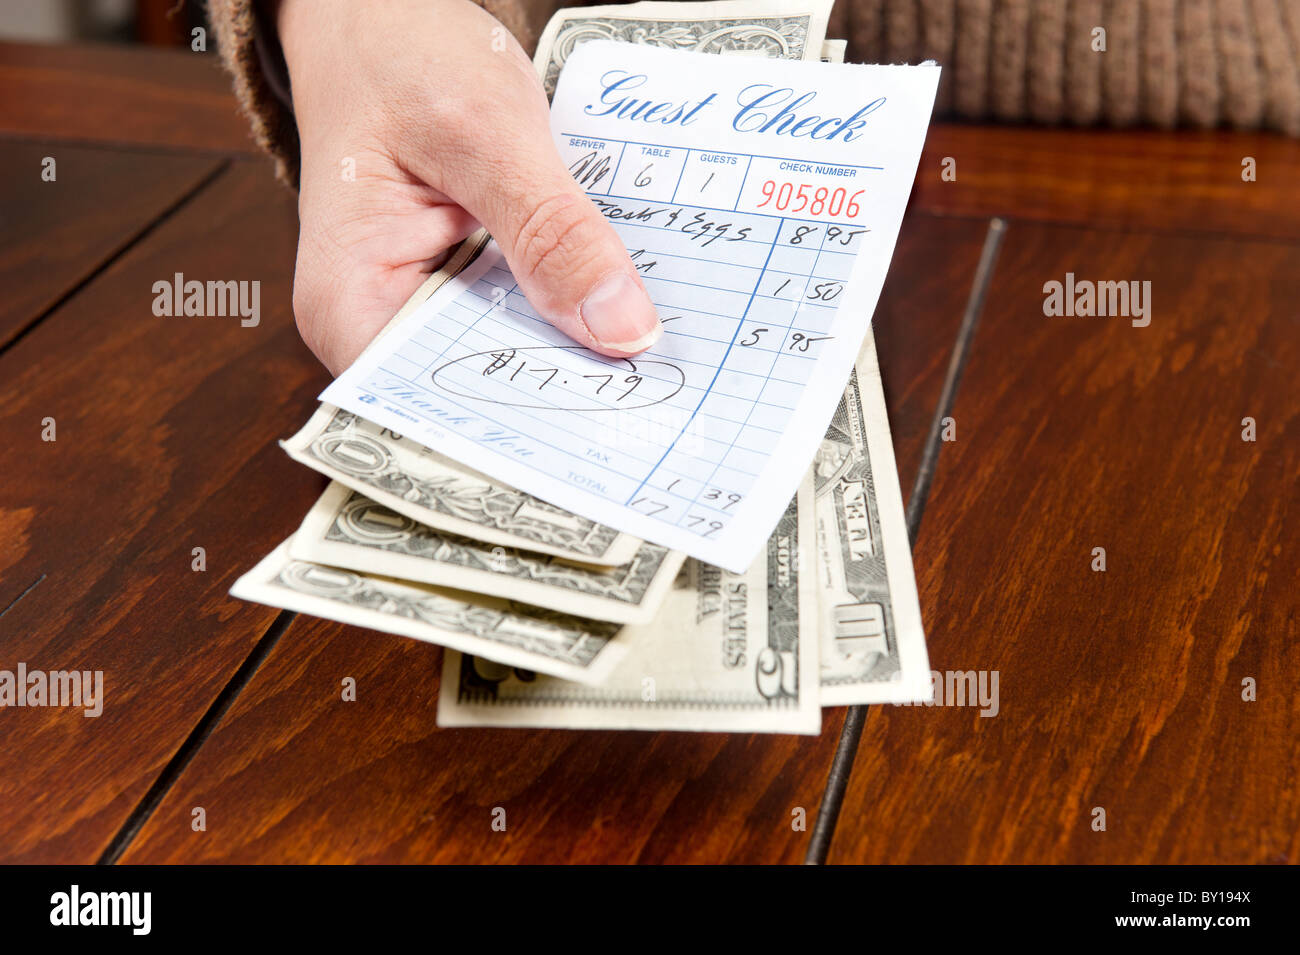 A woman pays her meal bill with cash. Stock Photo